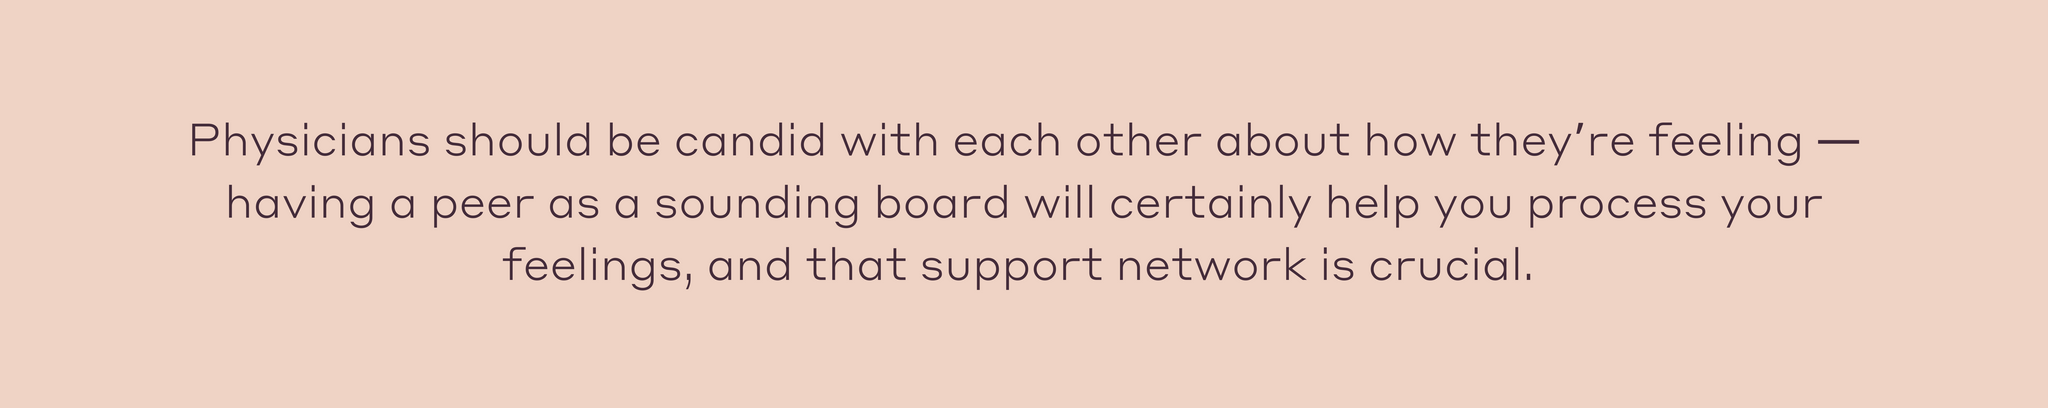 Having a peer as a sounding board will certainly help you process your feelings, and that support network is crucial. 